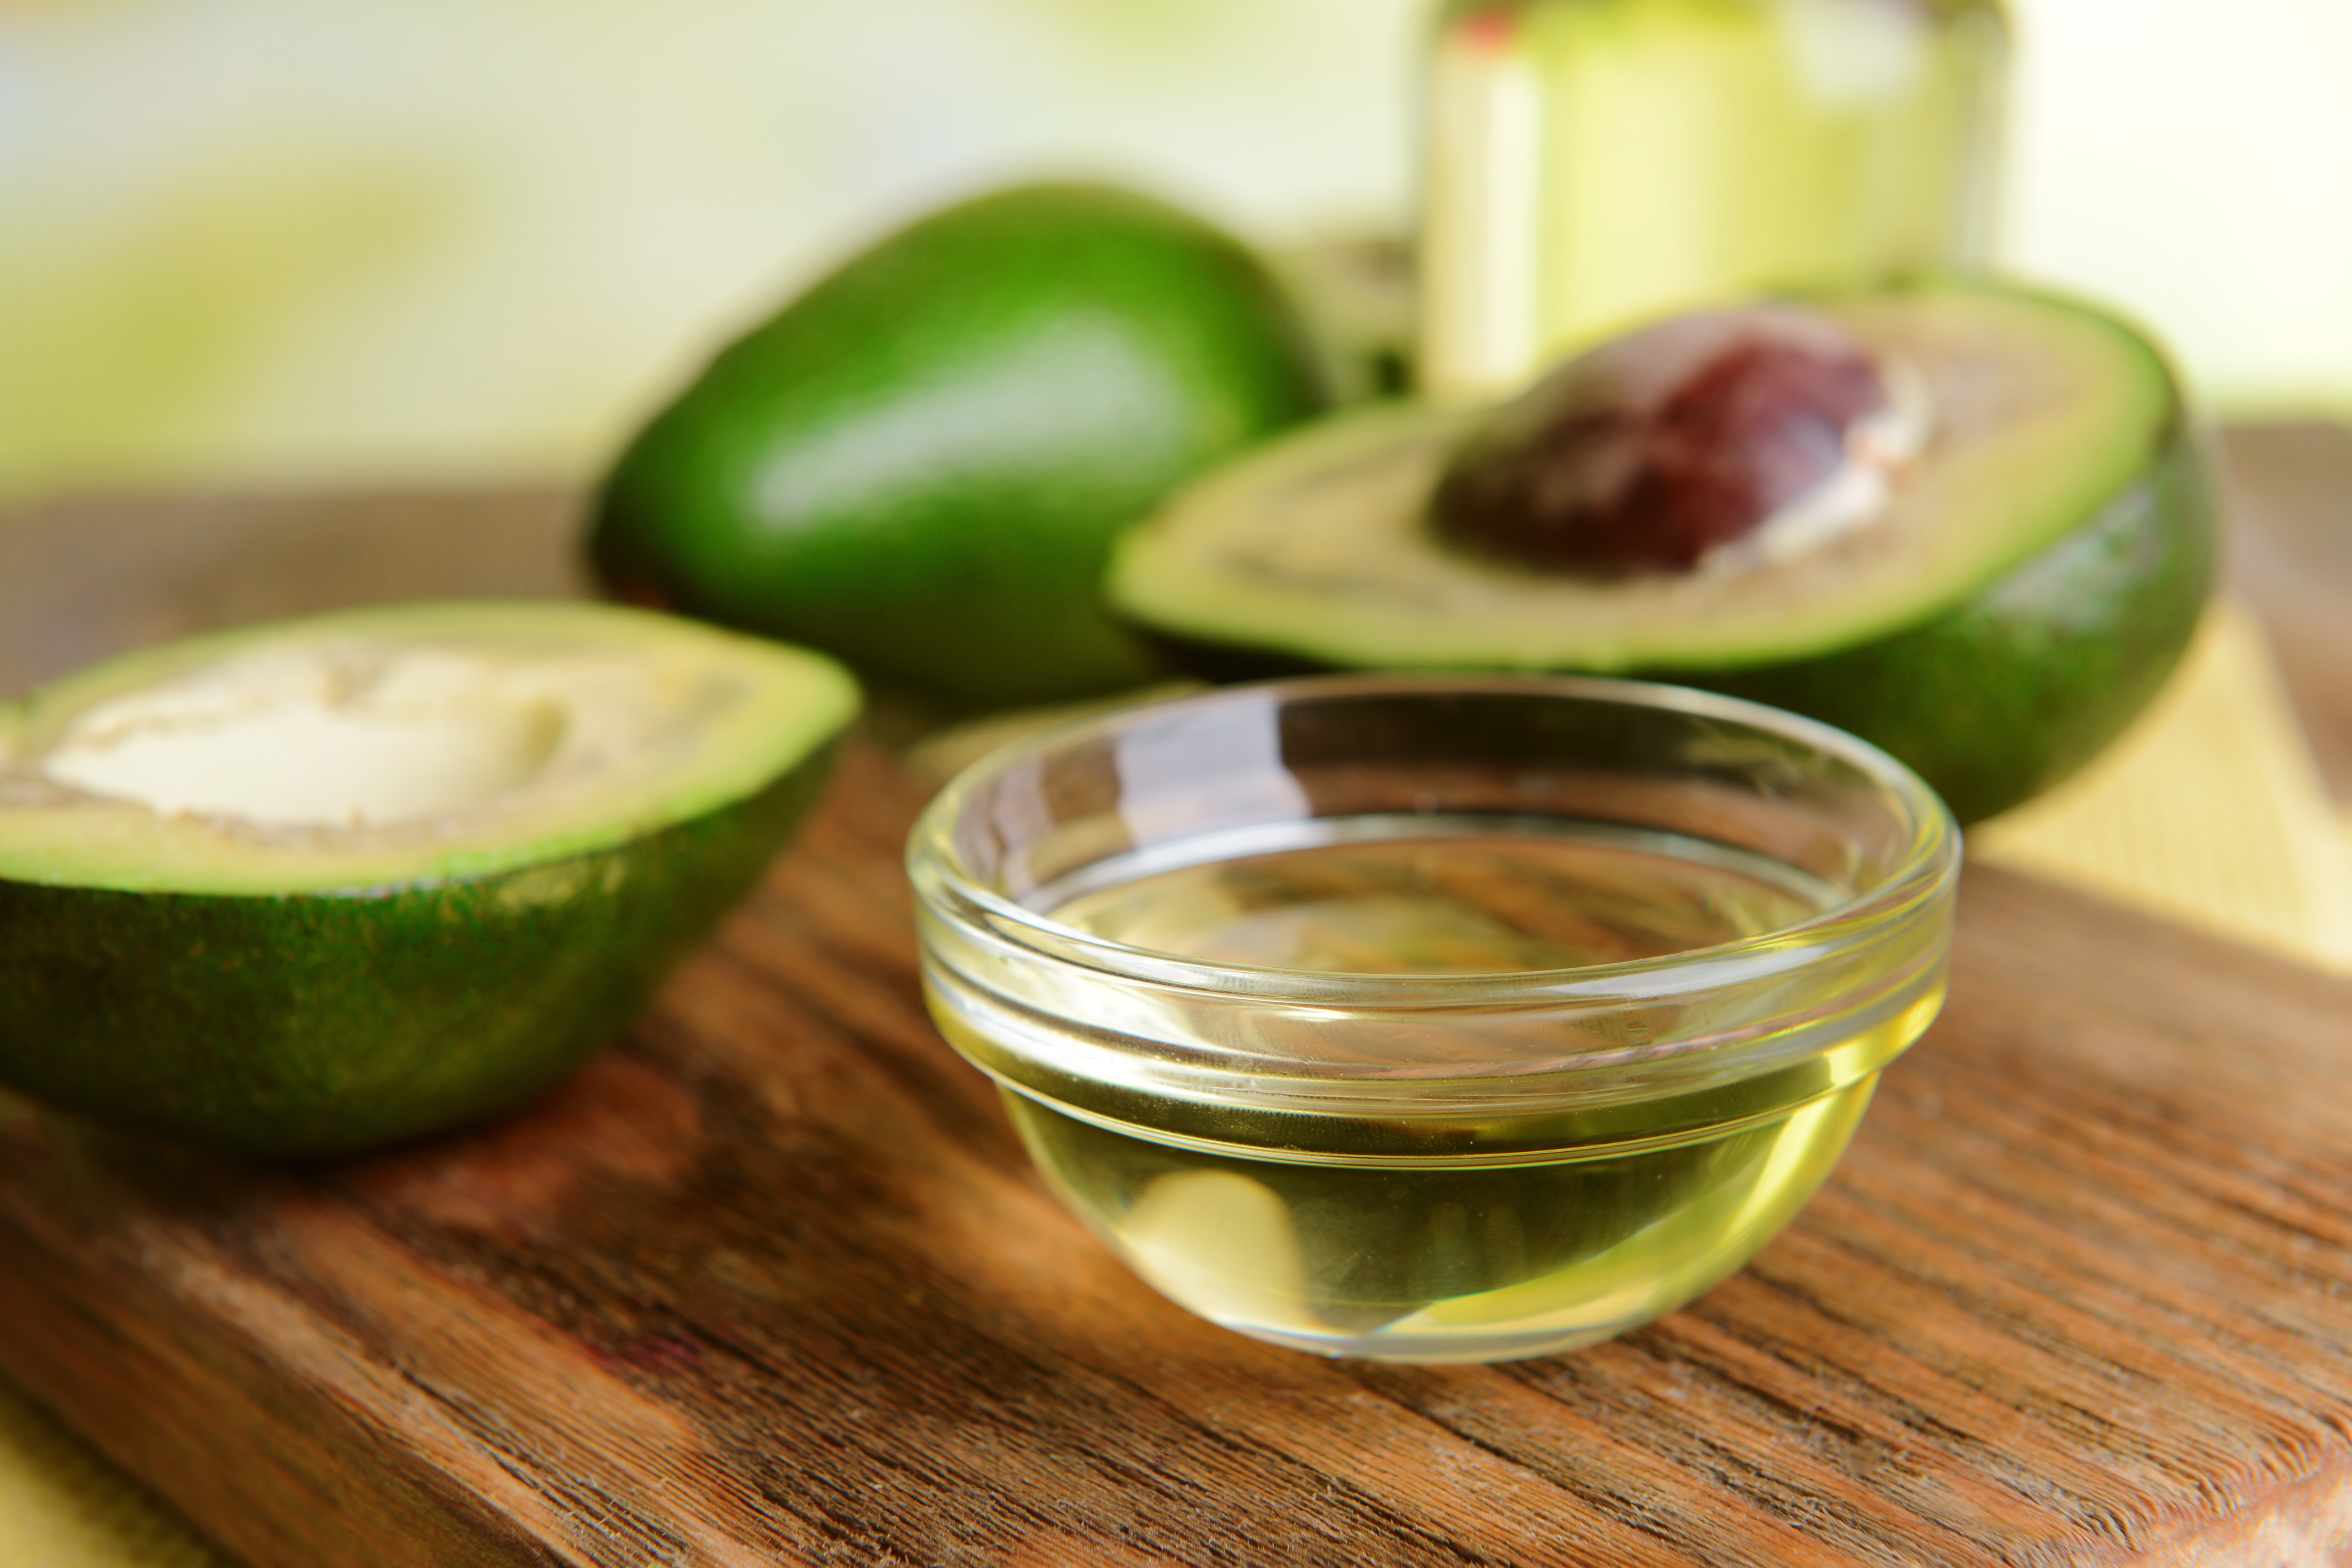 Is Avocado Oil Good For You?